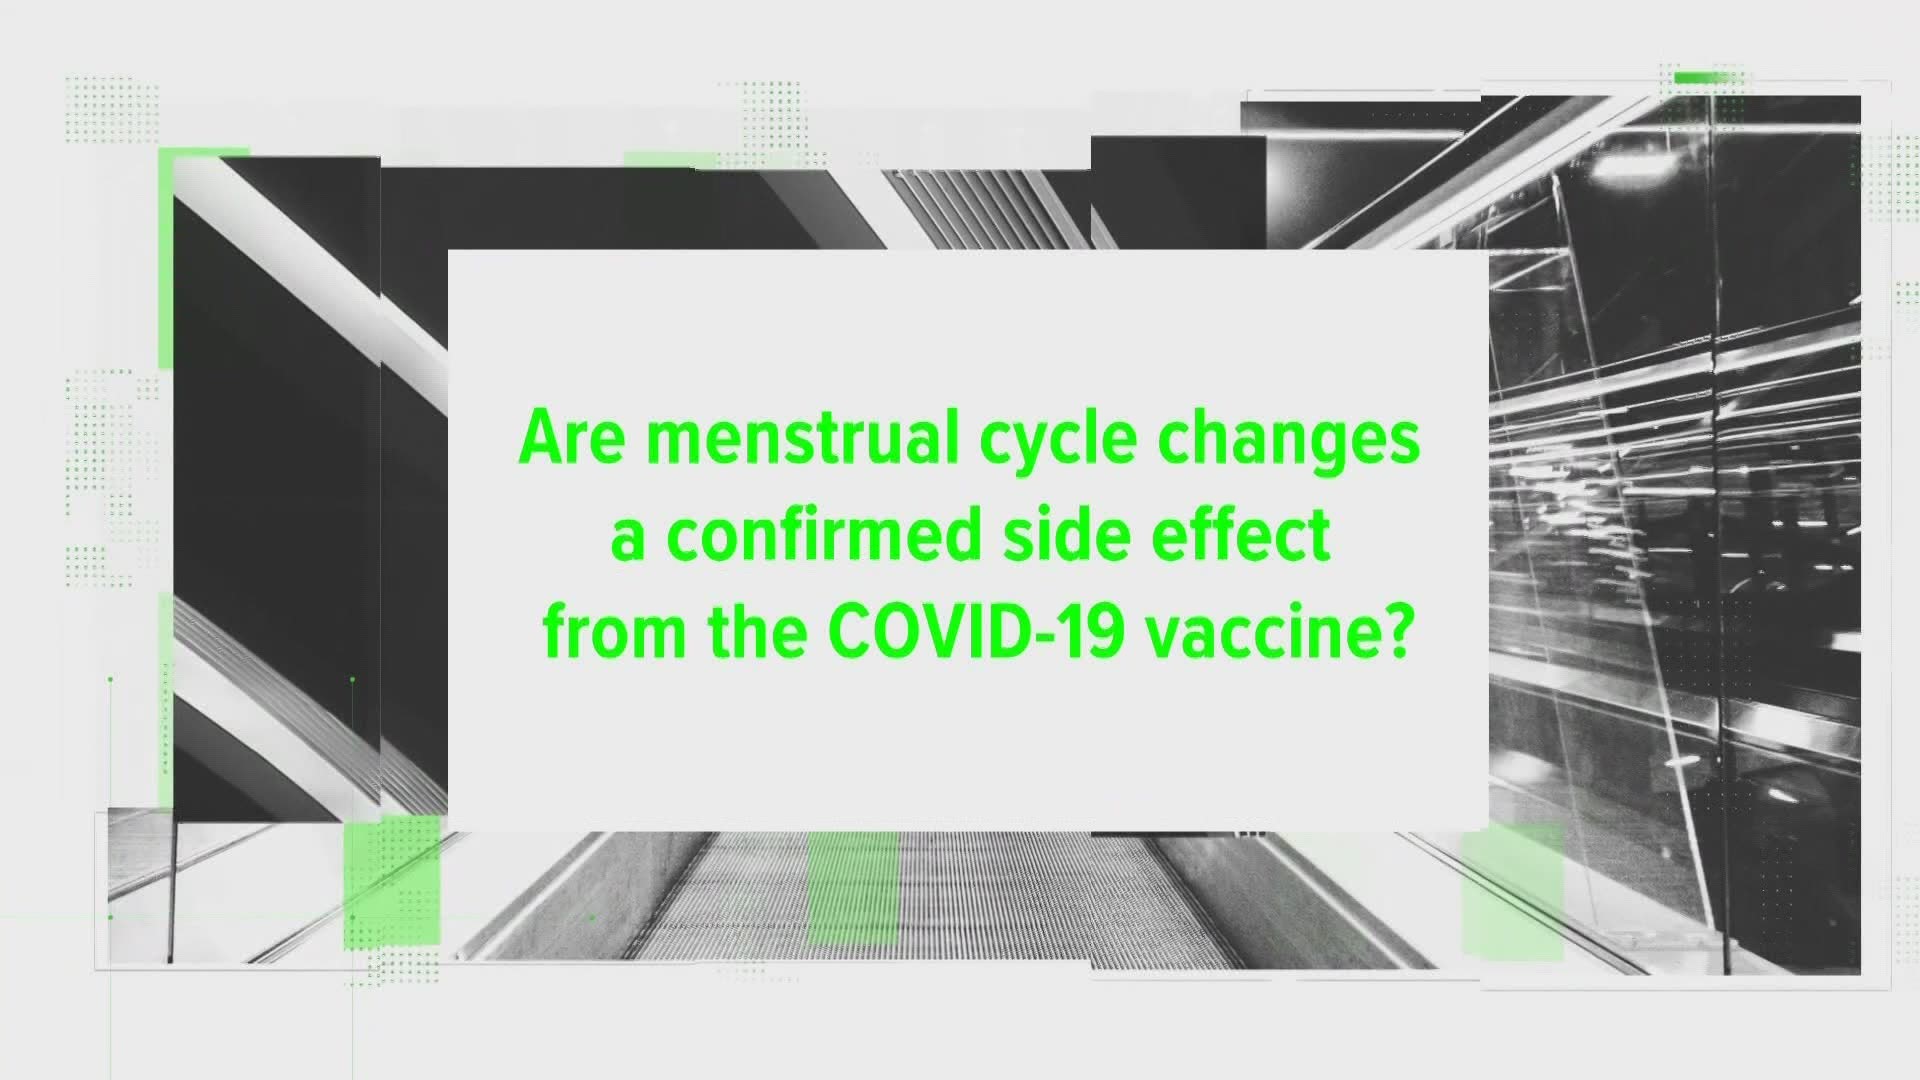 Our VERIFY team breaks down the claim that menstrual cycle changes are a side effect from the coronavirus vaccine.